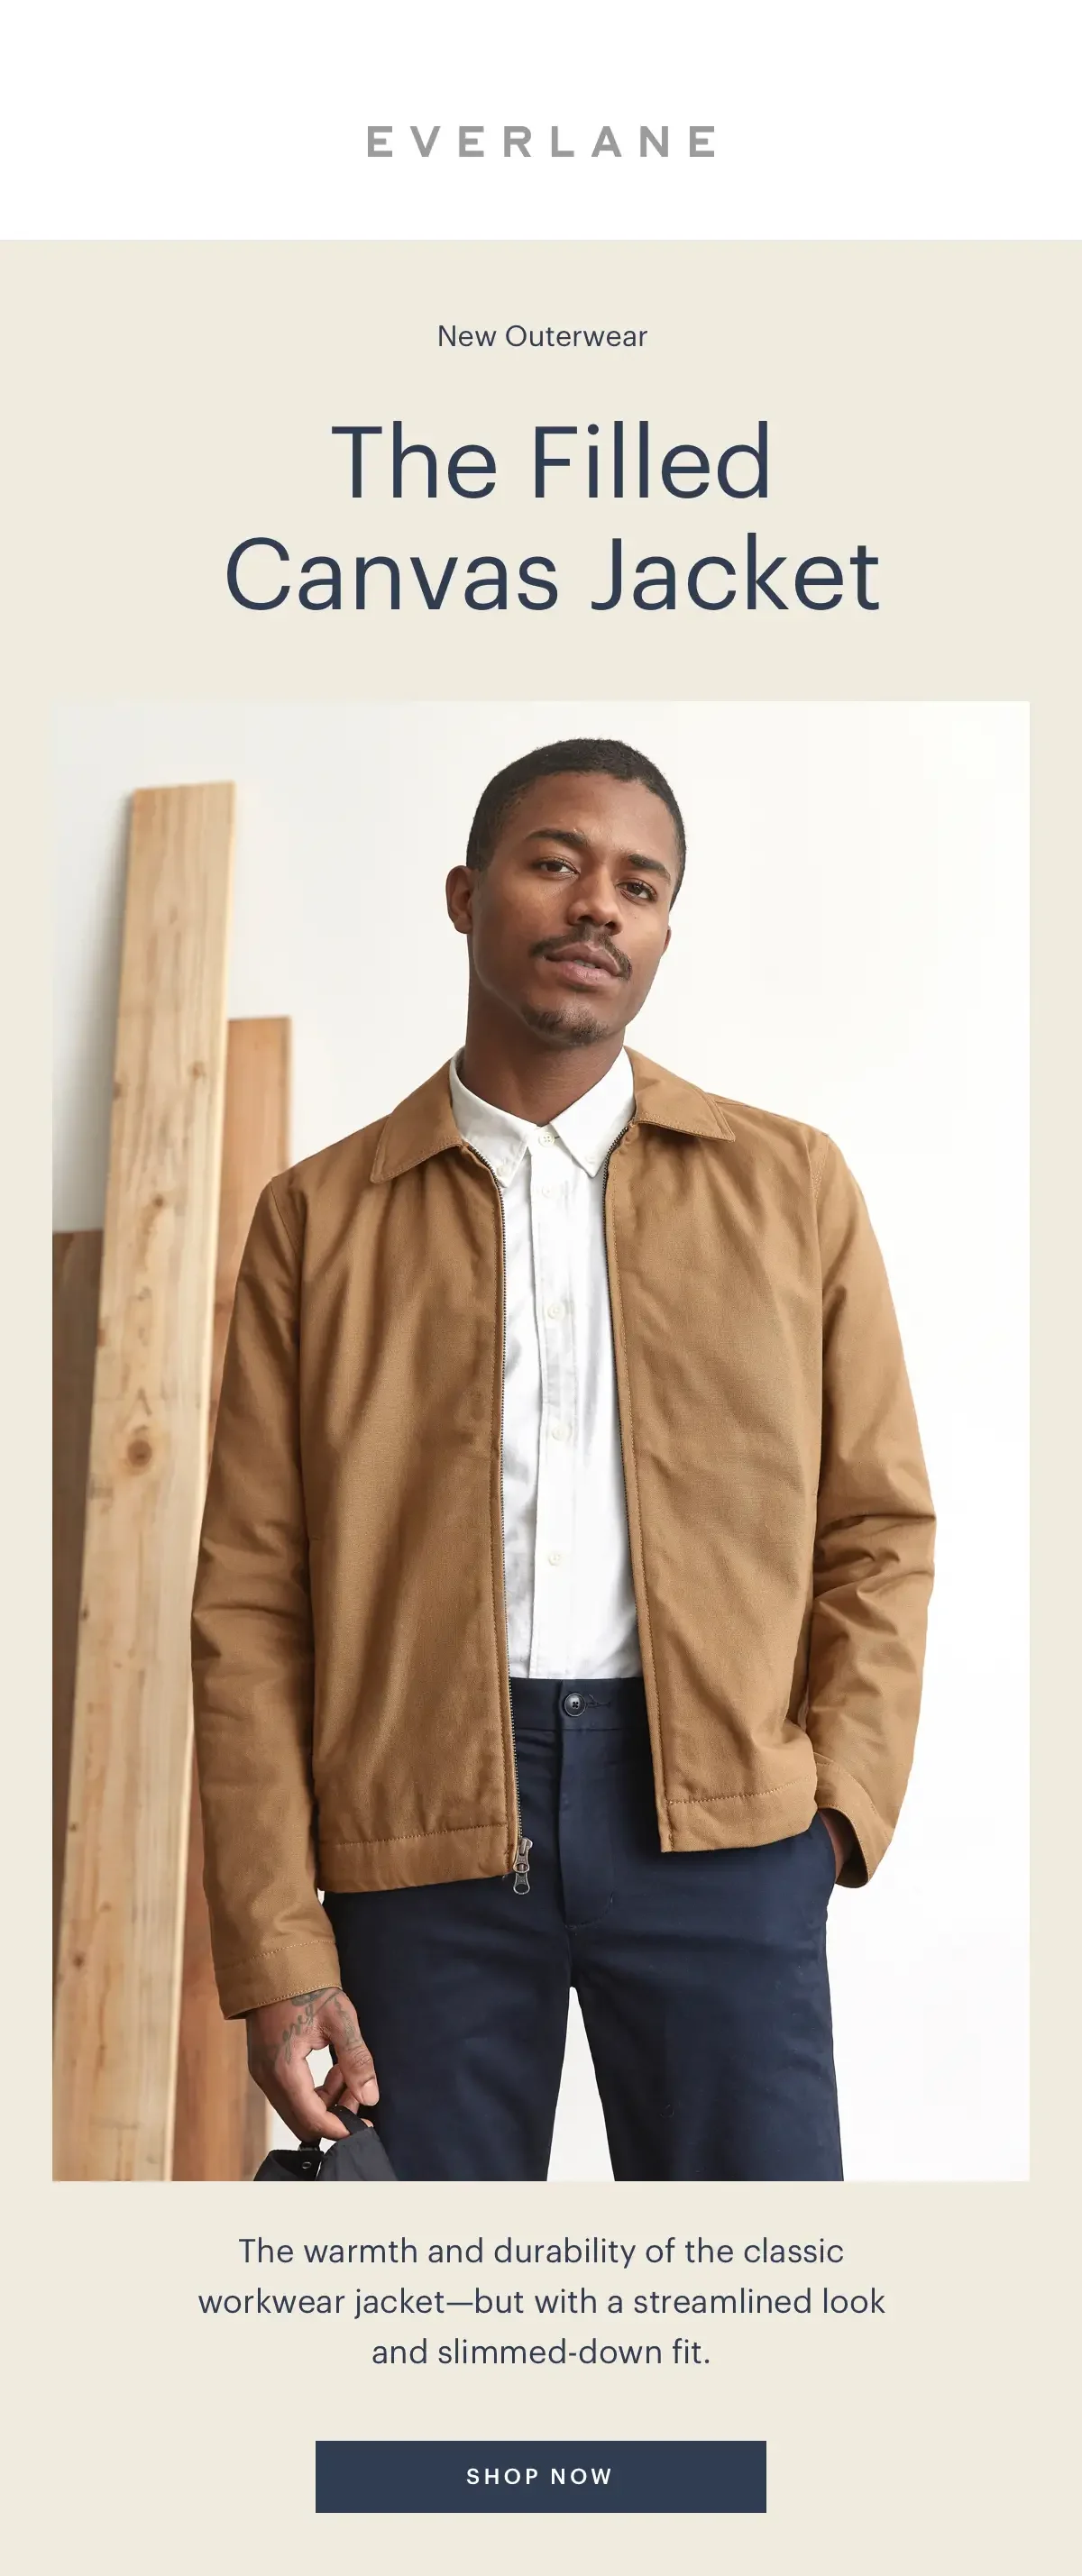 Everlane: Introducing The Filled Canvas Jacket